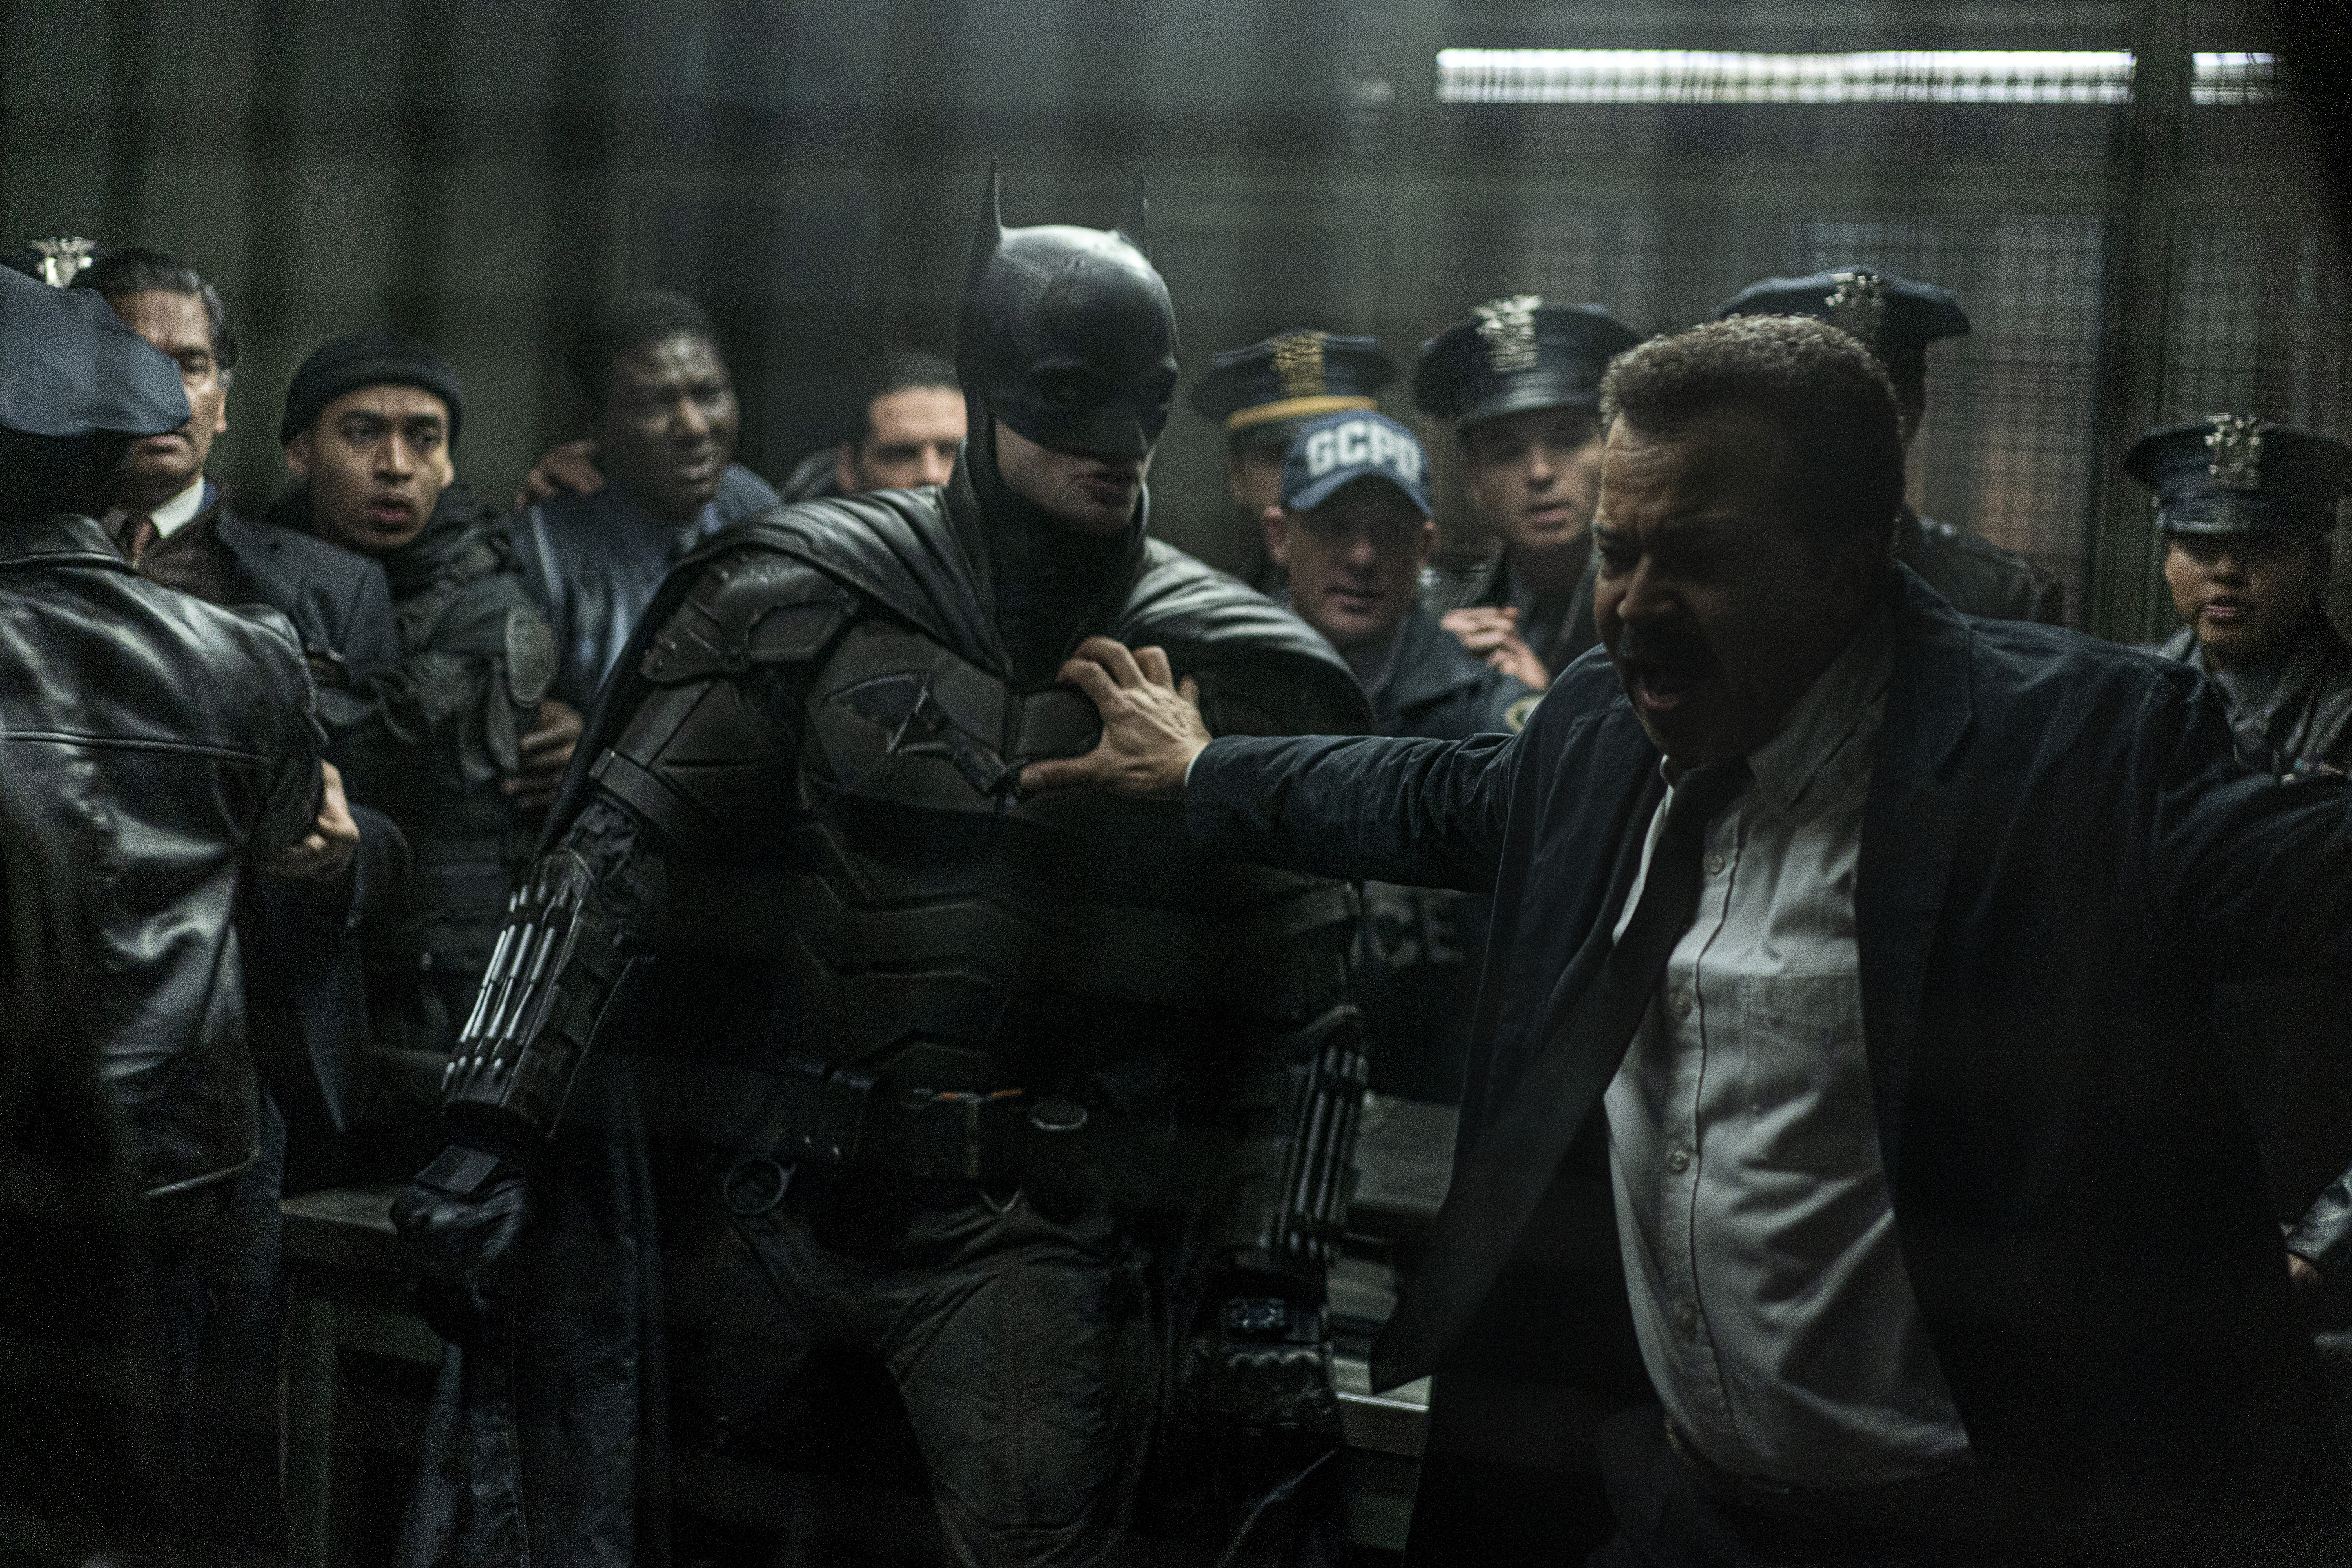 The Batman review: A sensational reboot in need of trimming | Ars Technica